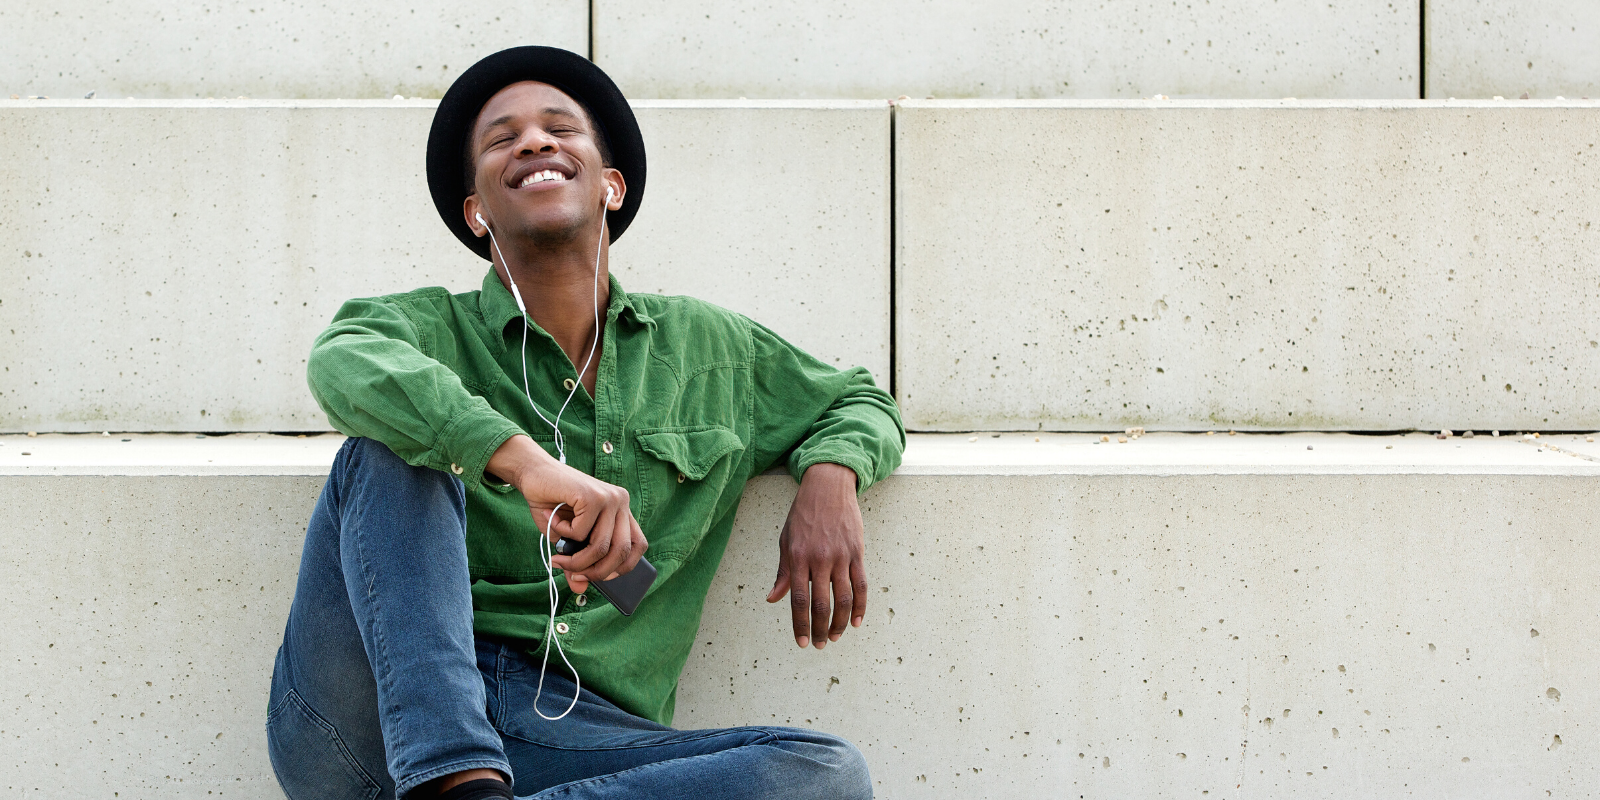 Man in his 30s looking relaxed and happy sitting on the ground in an urban setting with earbuds in